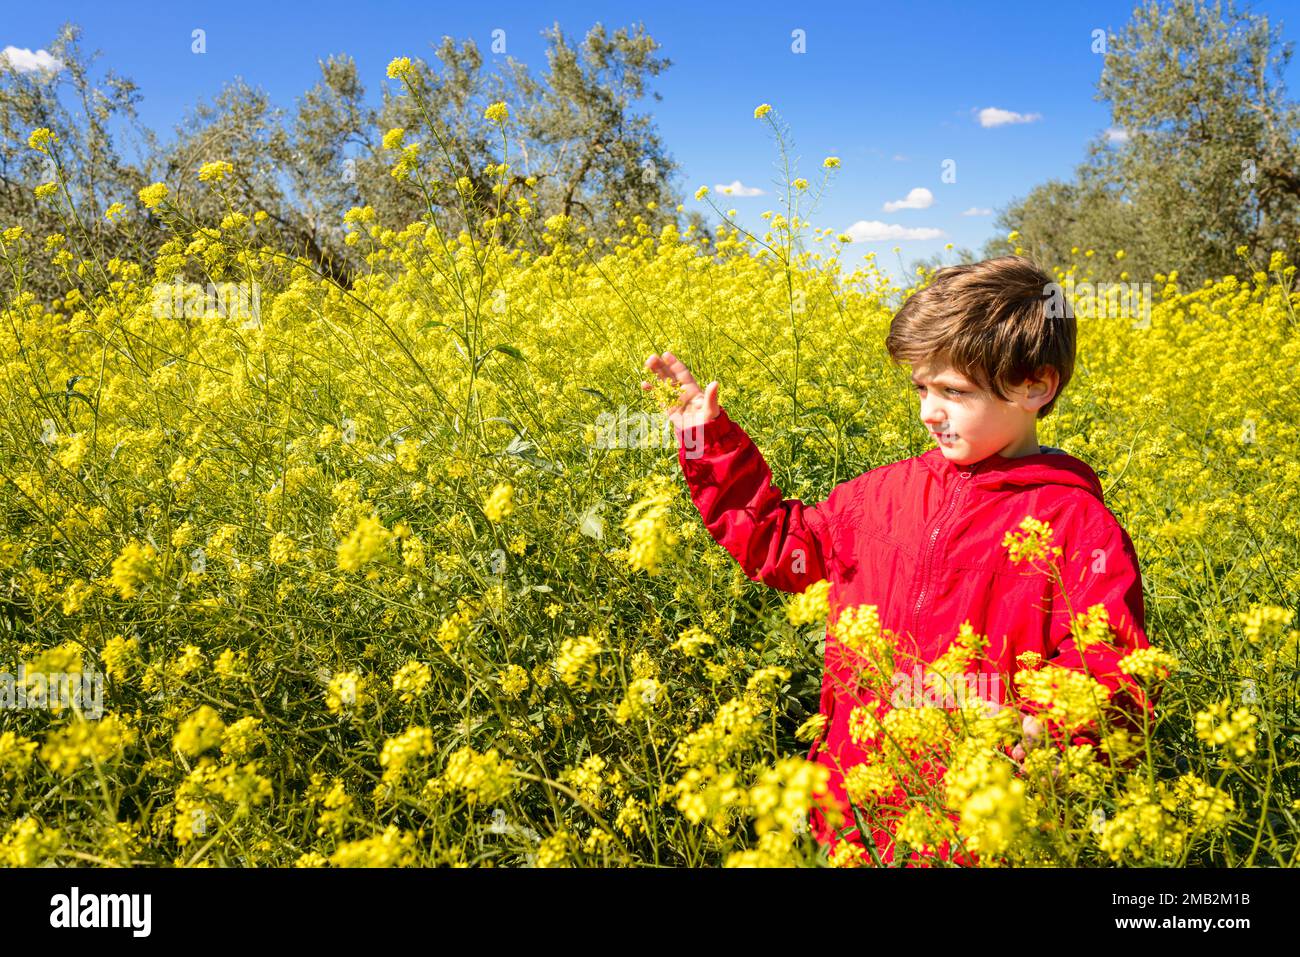 A Caucasian child dressed in red, surrounded by yellow flowers, with a blue sky in the background. Contact with nature is important for children's phy Stock Photo